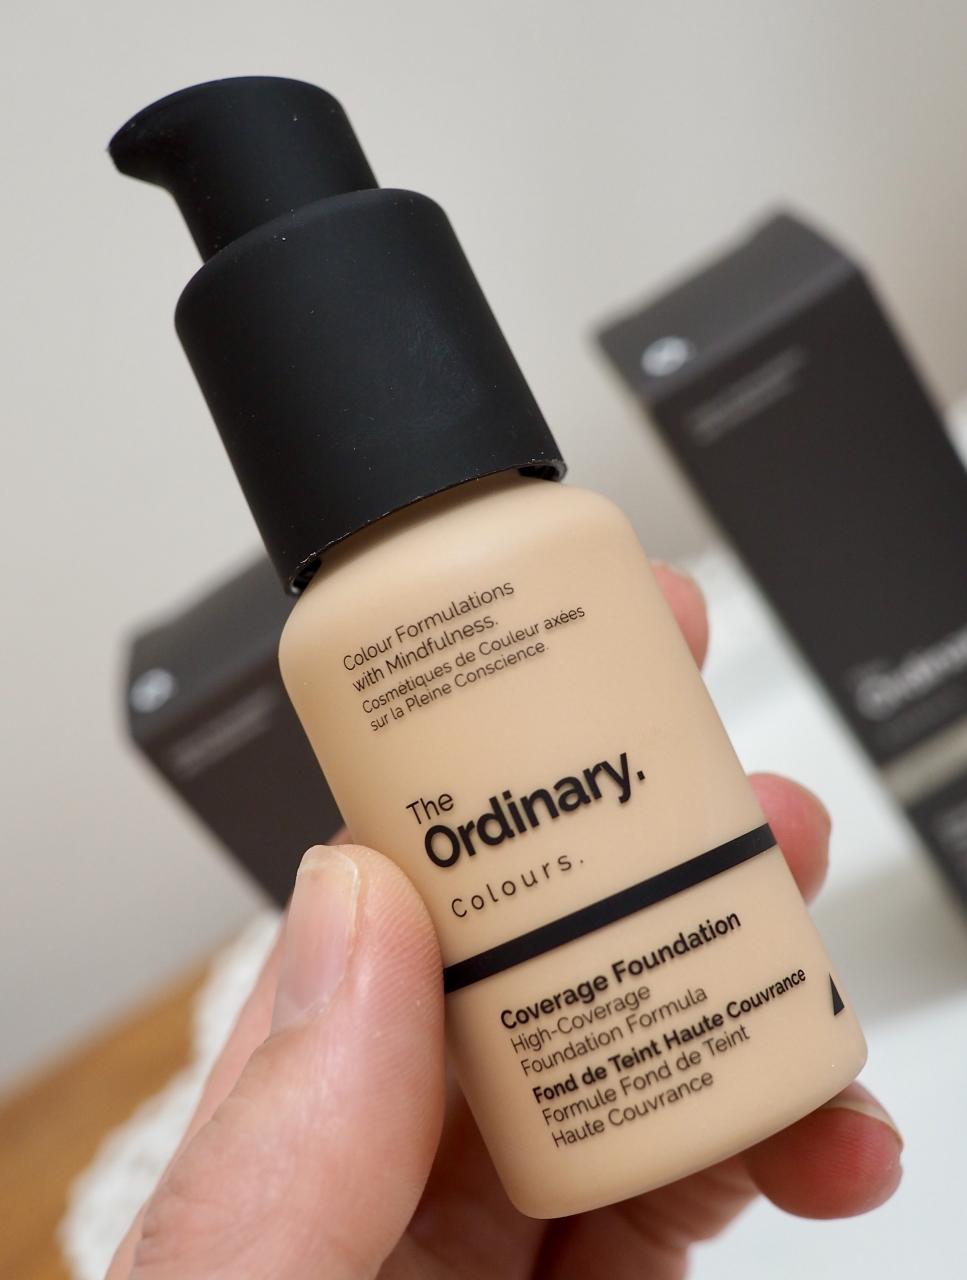 The Ordinary Colours Coverage Foundation Review ⋆ Niapattenlooks